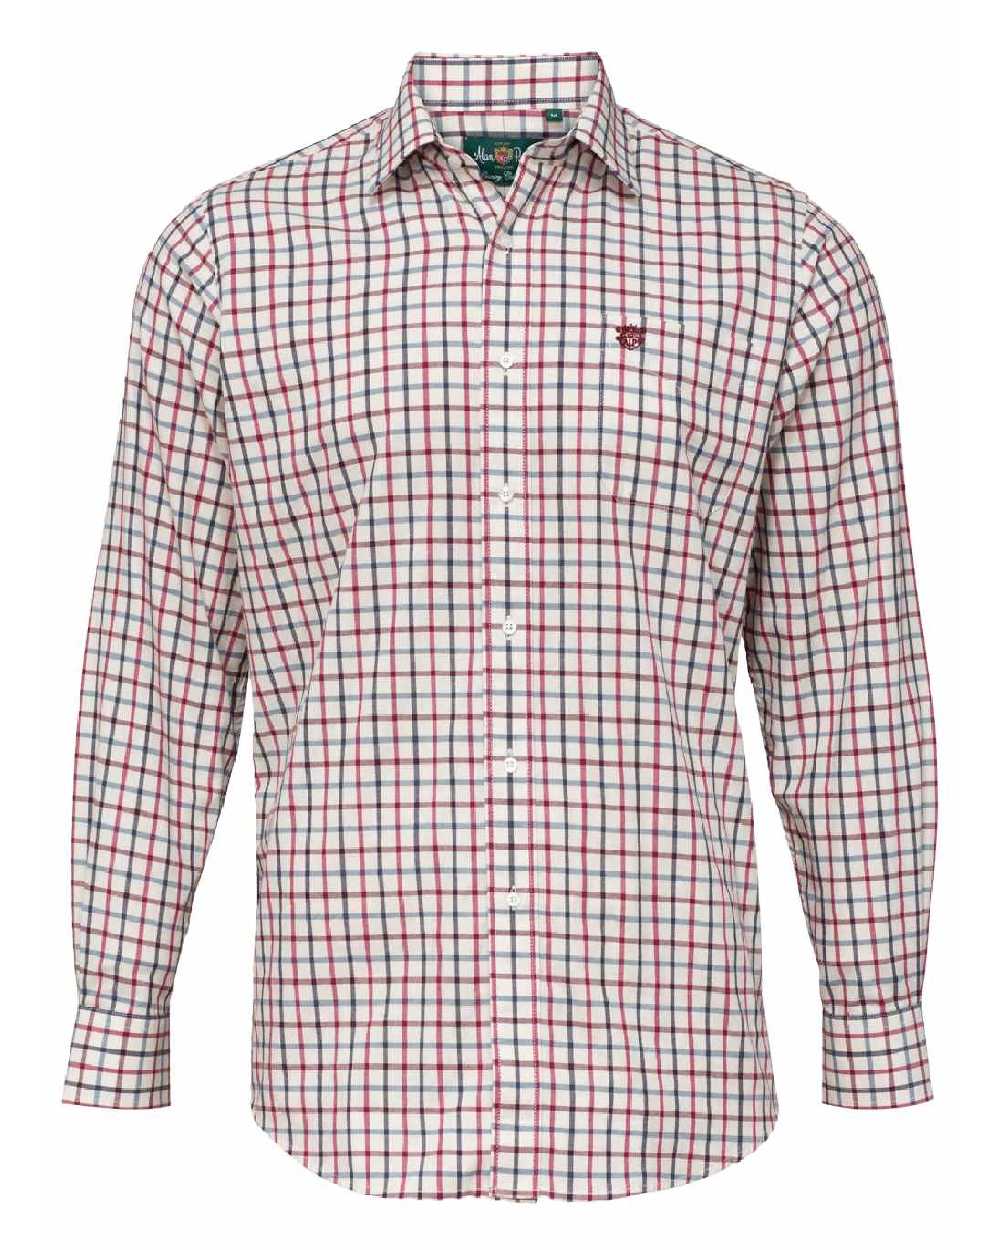 Alan Paine Ilkley Shirt in Red Check 